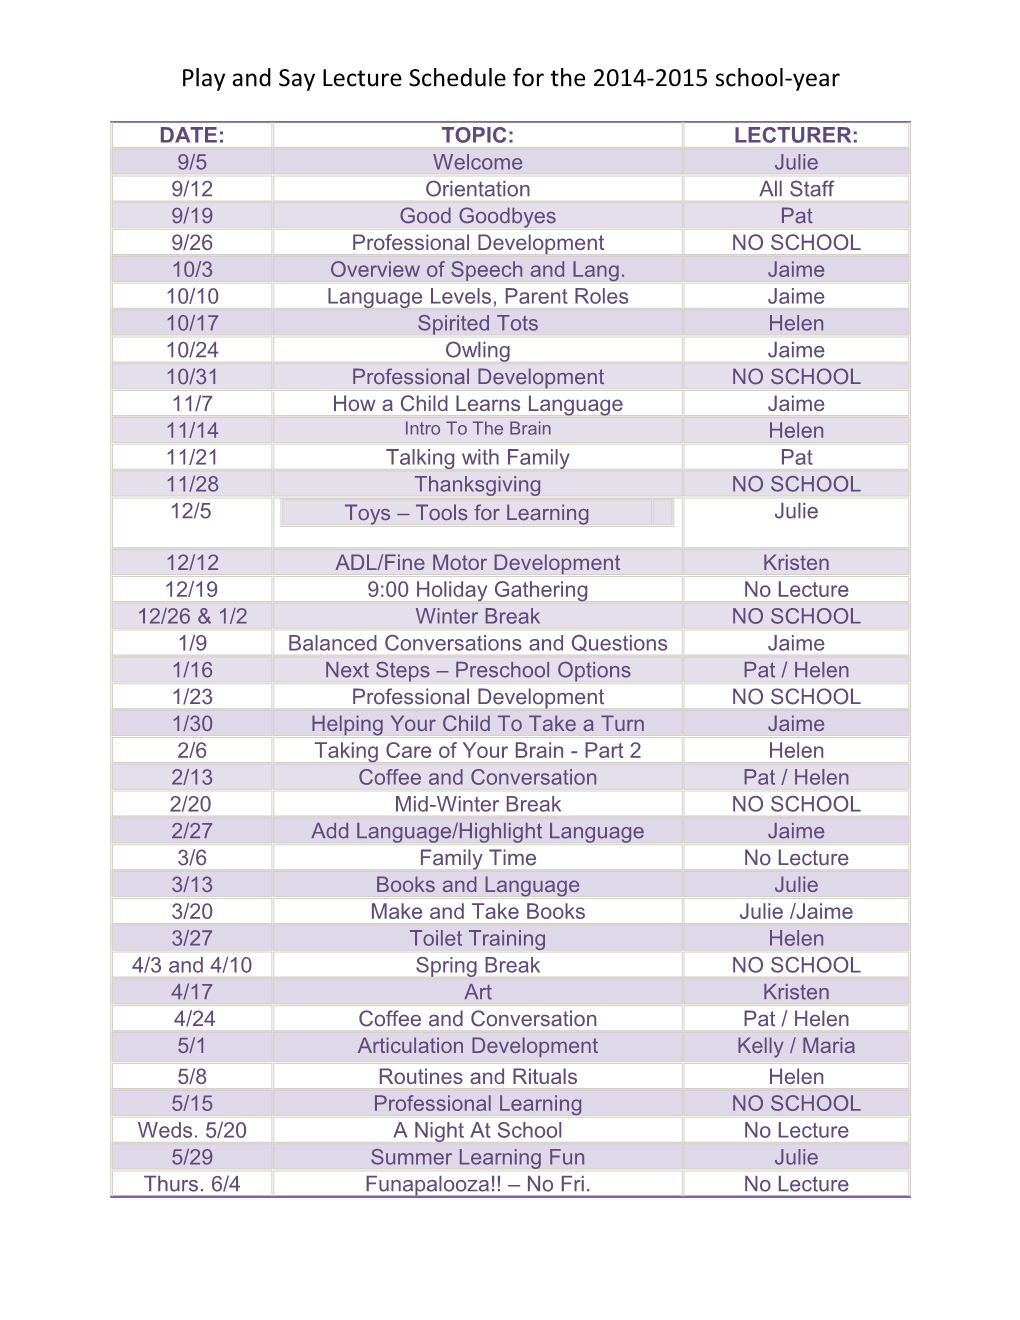 Play and Say Lecture Schedule for the 2014-2015 School-Year